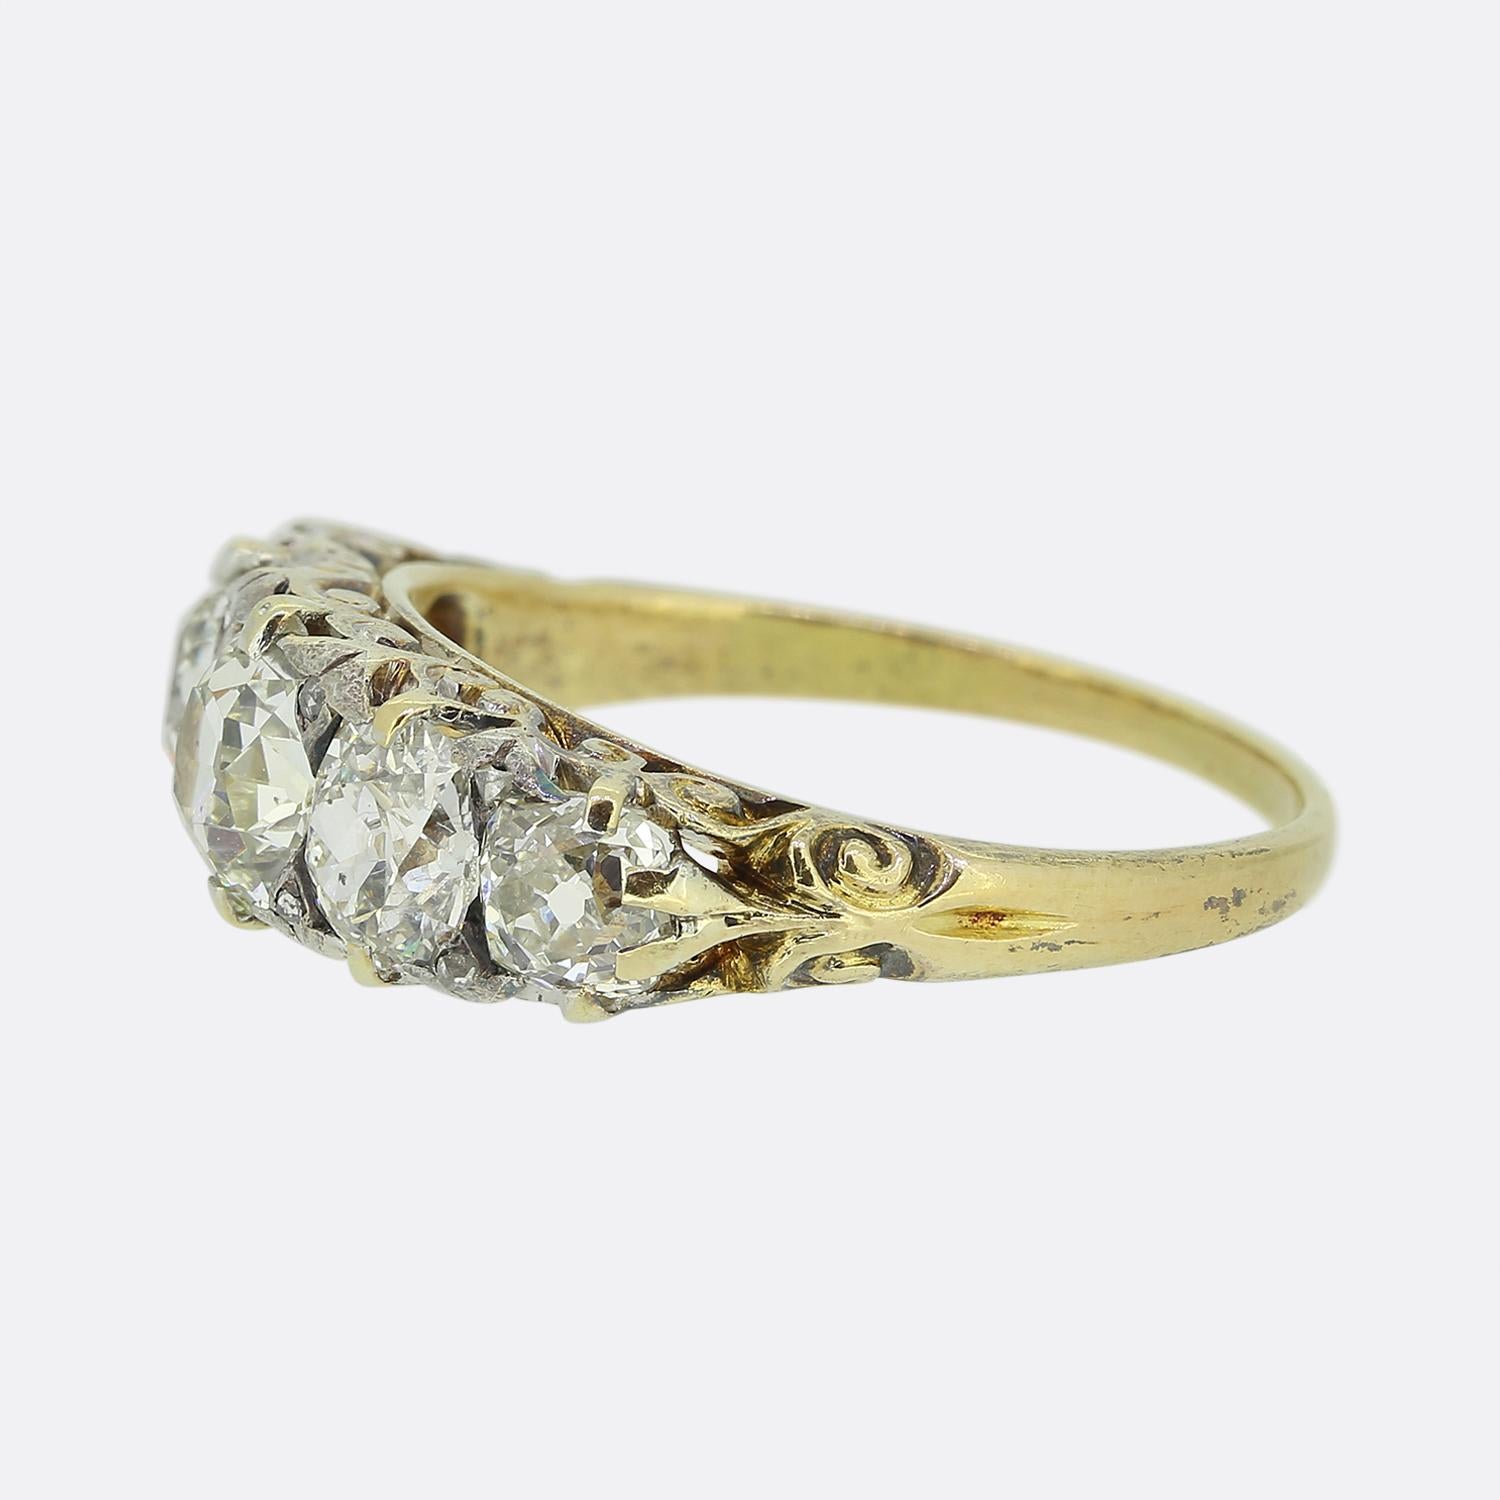 This is an 18ct yellow gold Victorian diamond five stone ring. The diamonds are bright white old cuts and feature a lovely sparkle. They also graduate in size with the largest in the centre. It is finished with elegant scroll work on the gallery in